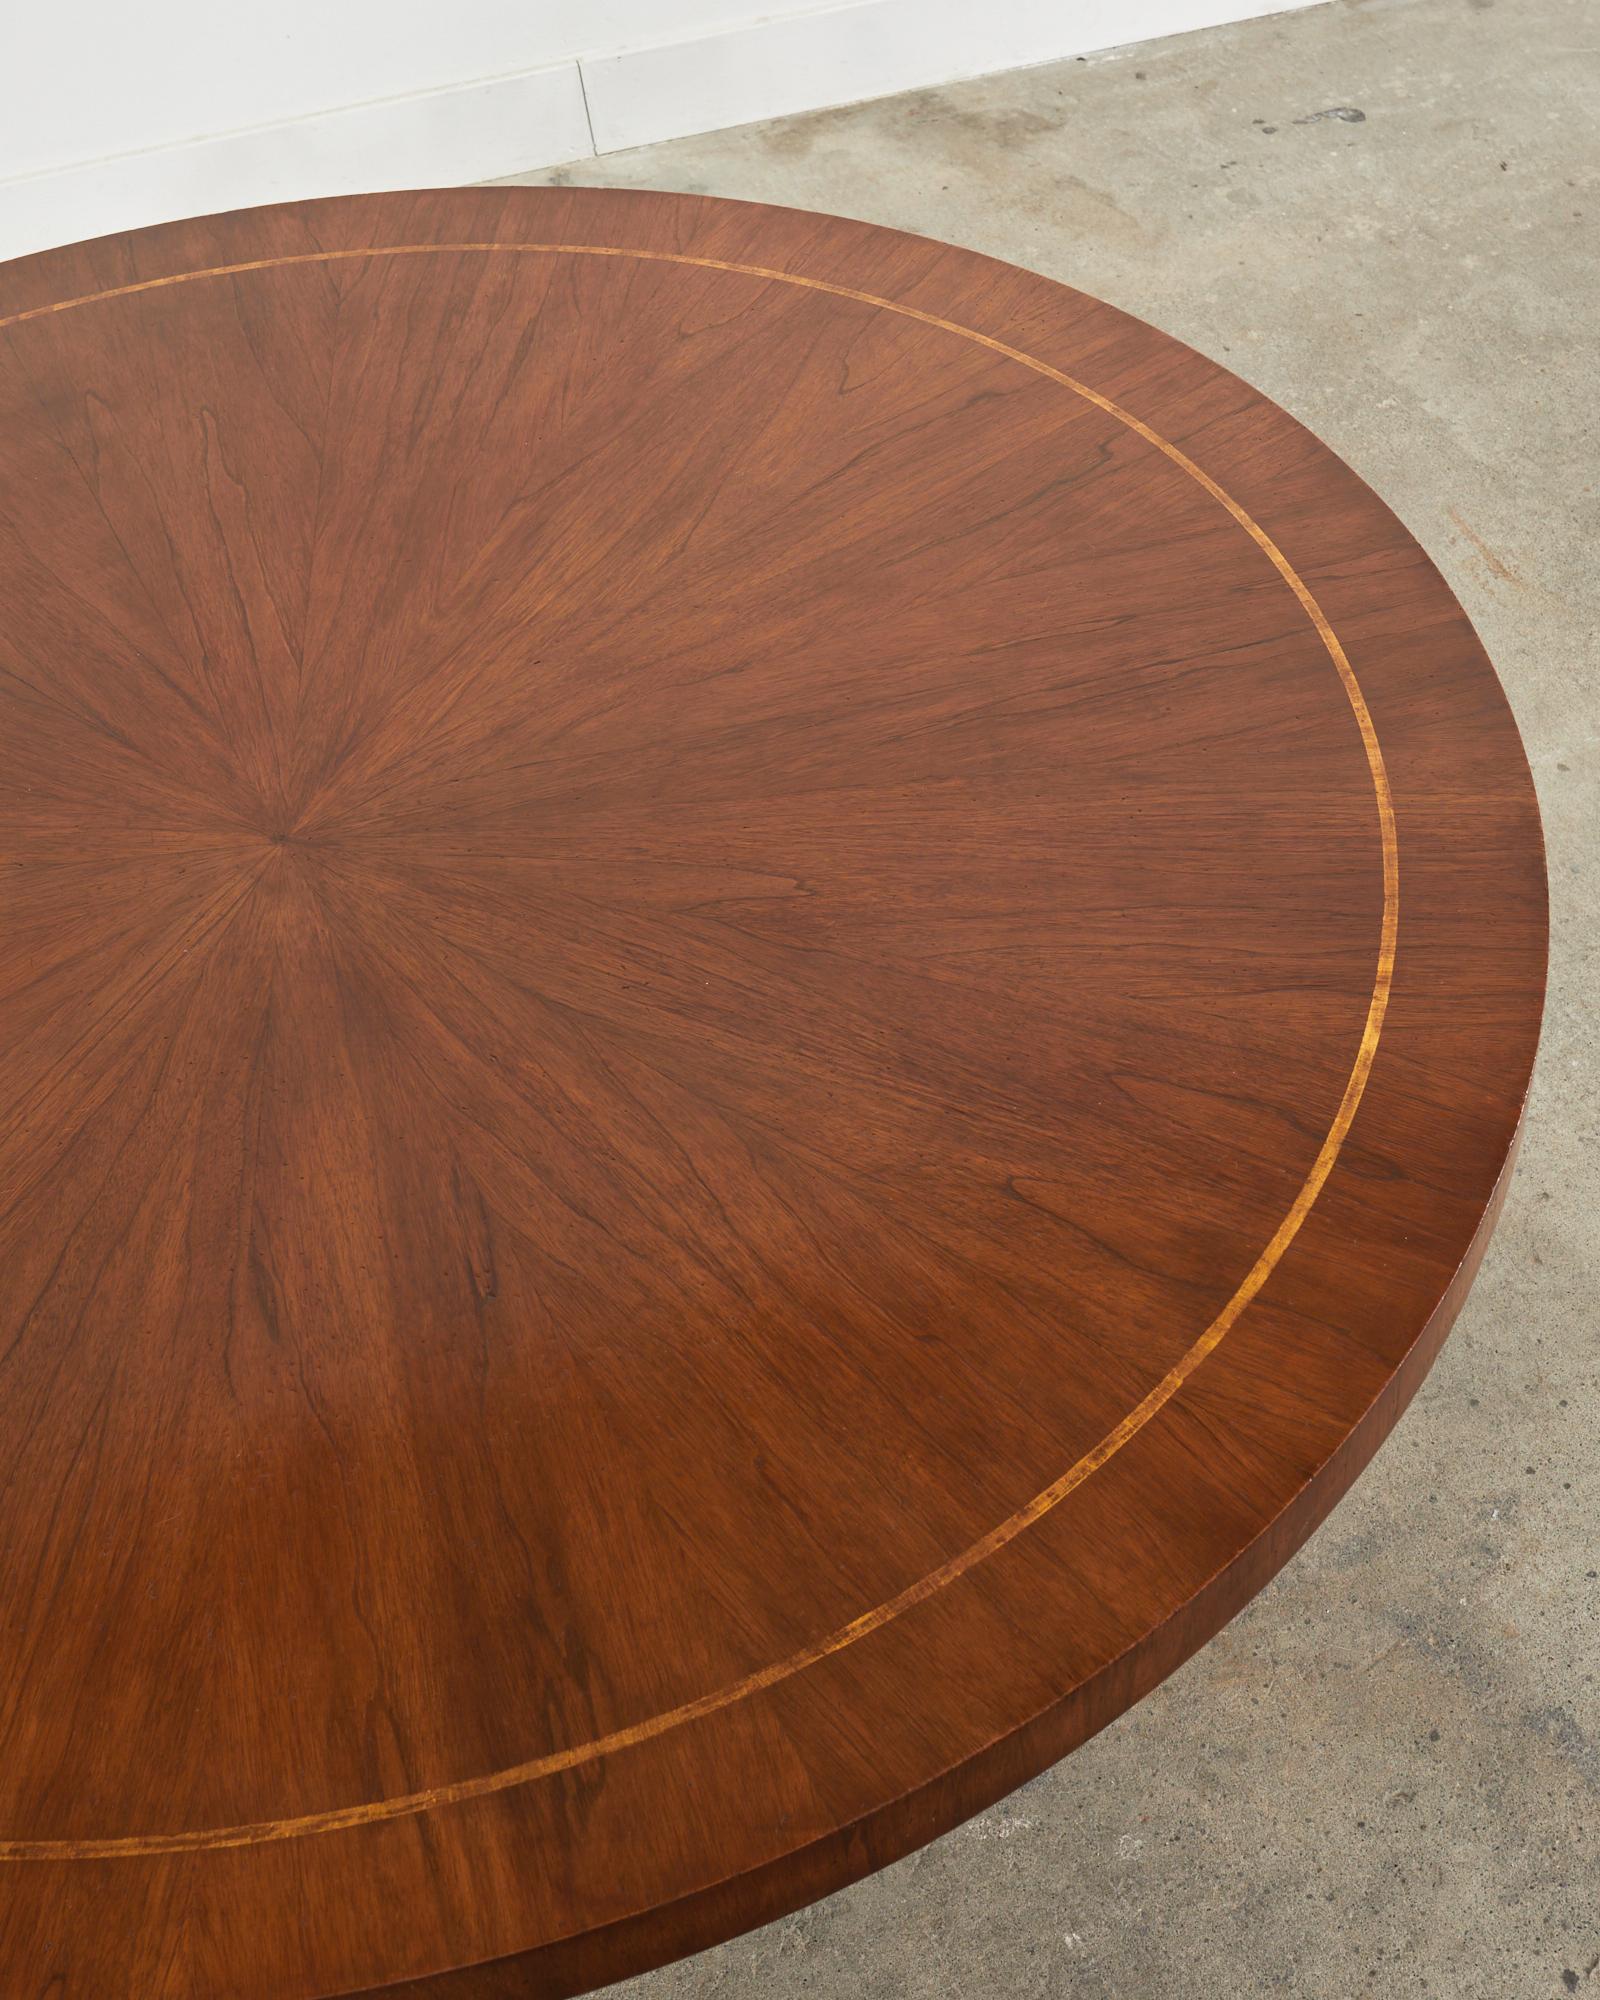 20th Century Grand Italian Neoclassical Style Round Tulip Dining or Center Table For Sale